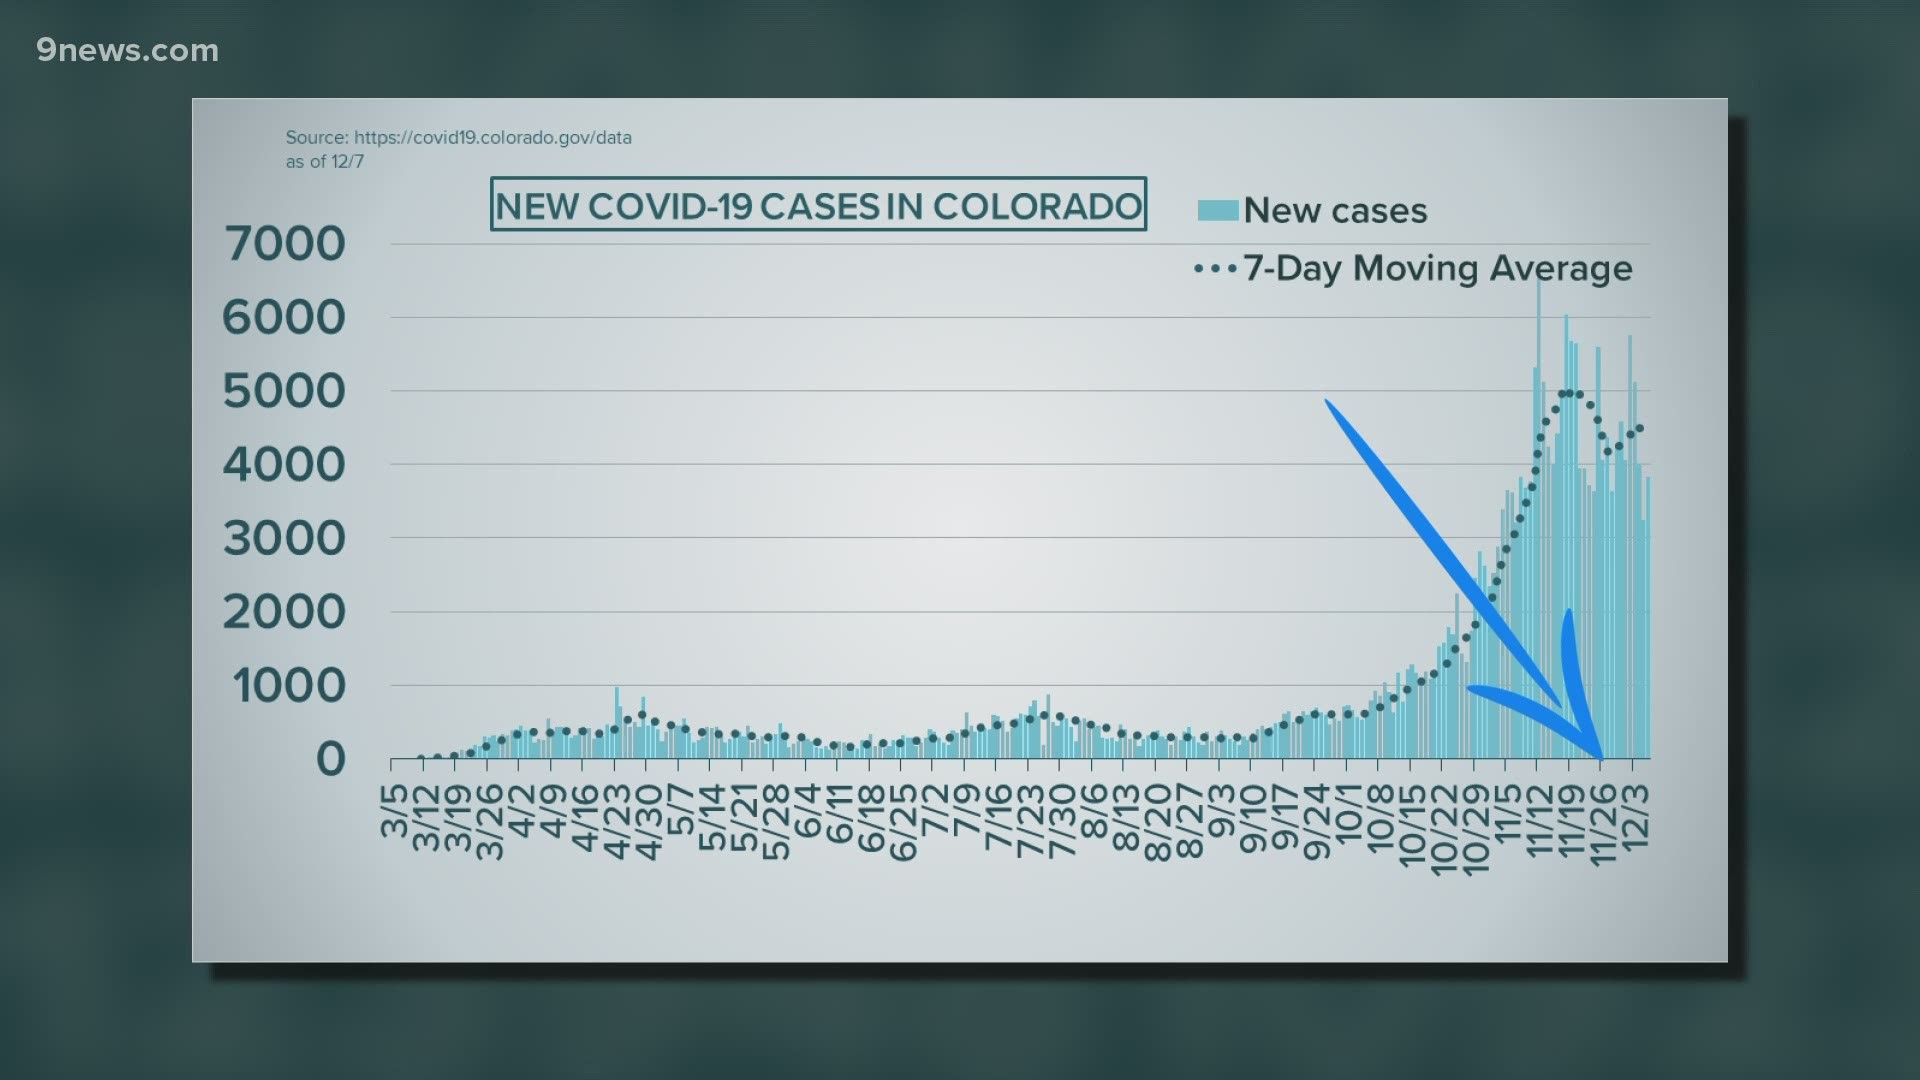 9Health Expert Dr. Payal Kohli has an in-depth, by the numbers look at Colorado's fight against COVID-19.